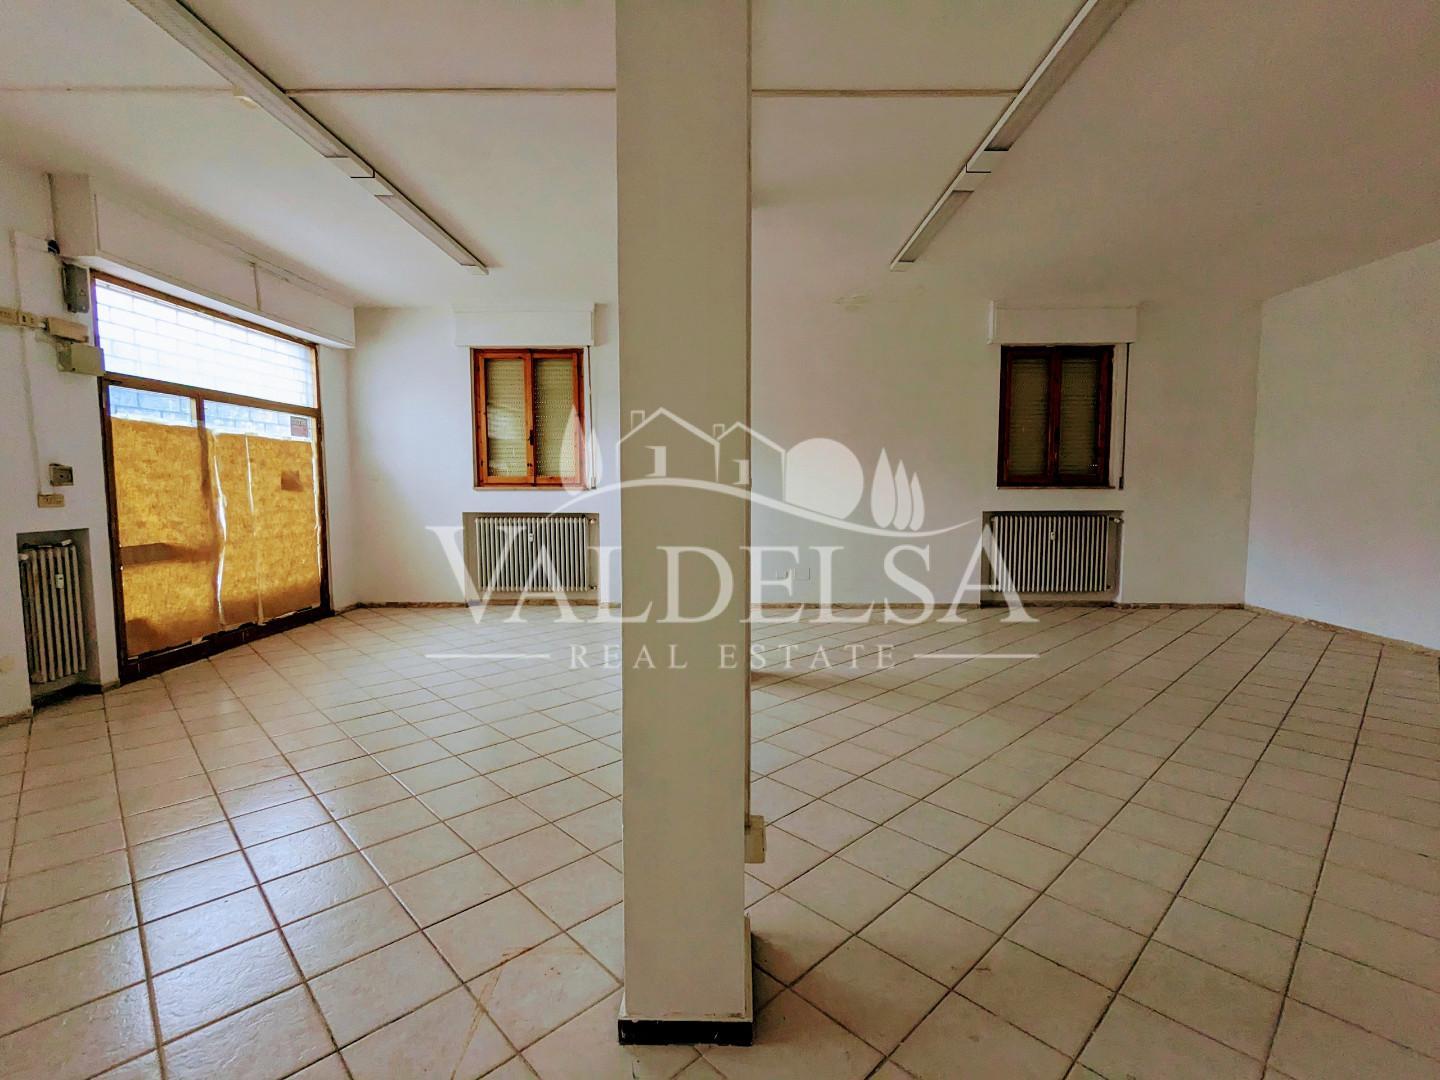 Business mall for commercial rentals in Poggibonsi (SI)